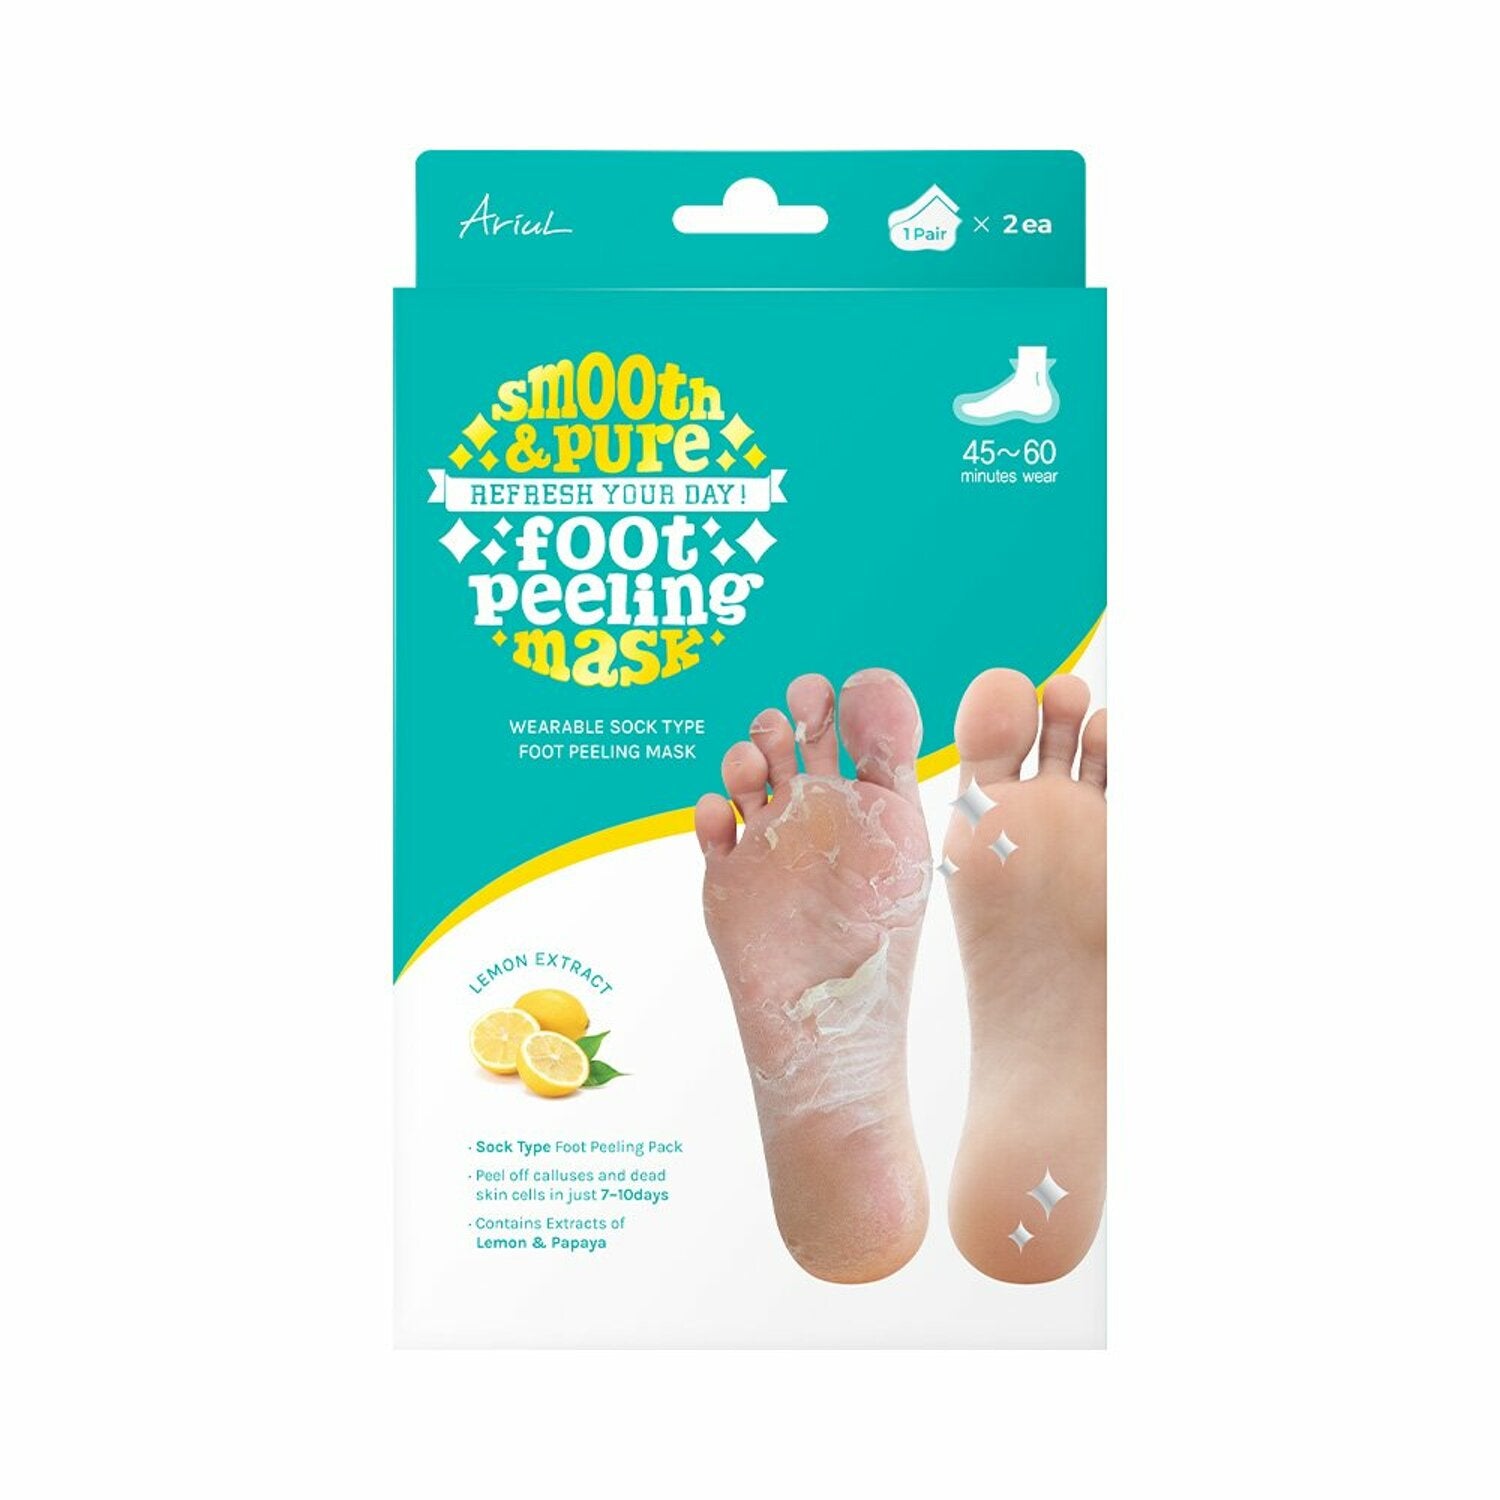 The viral Baby Foot Peel is 20% of at